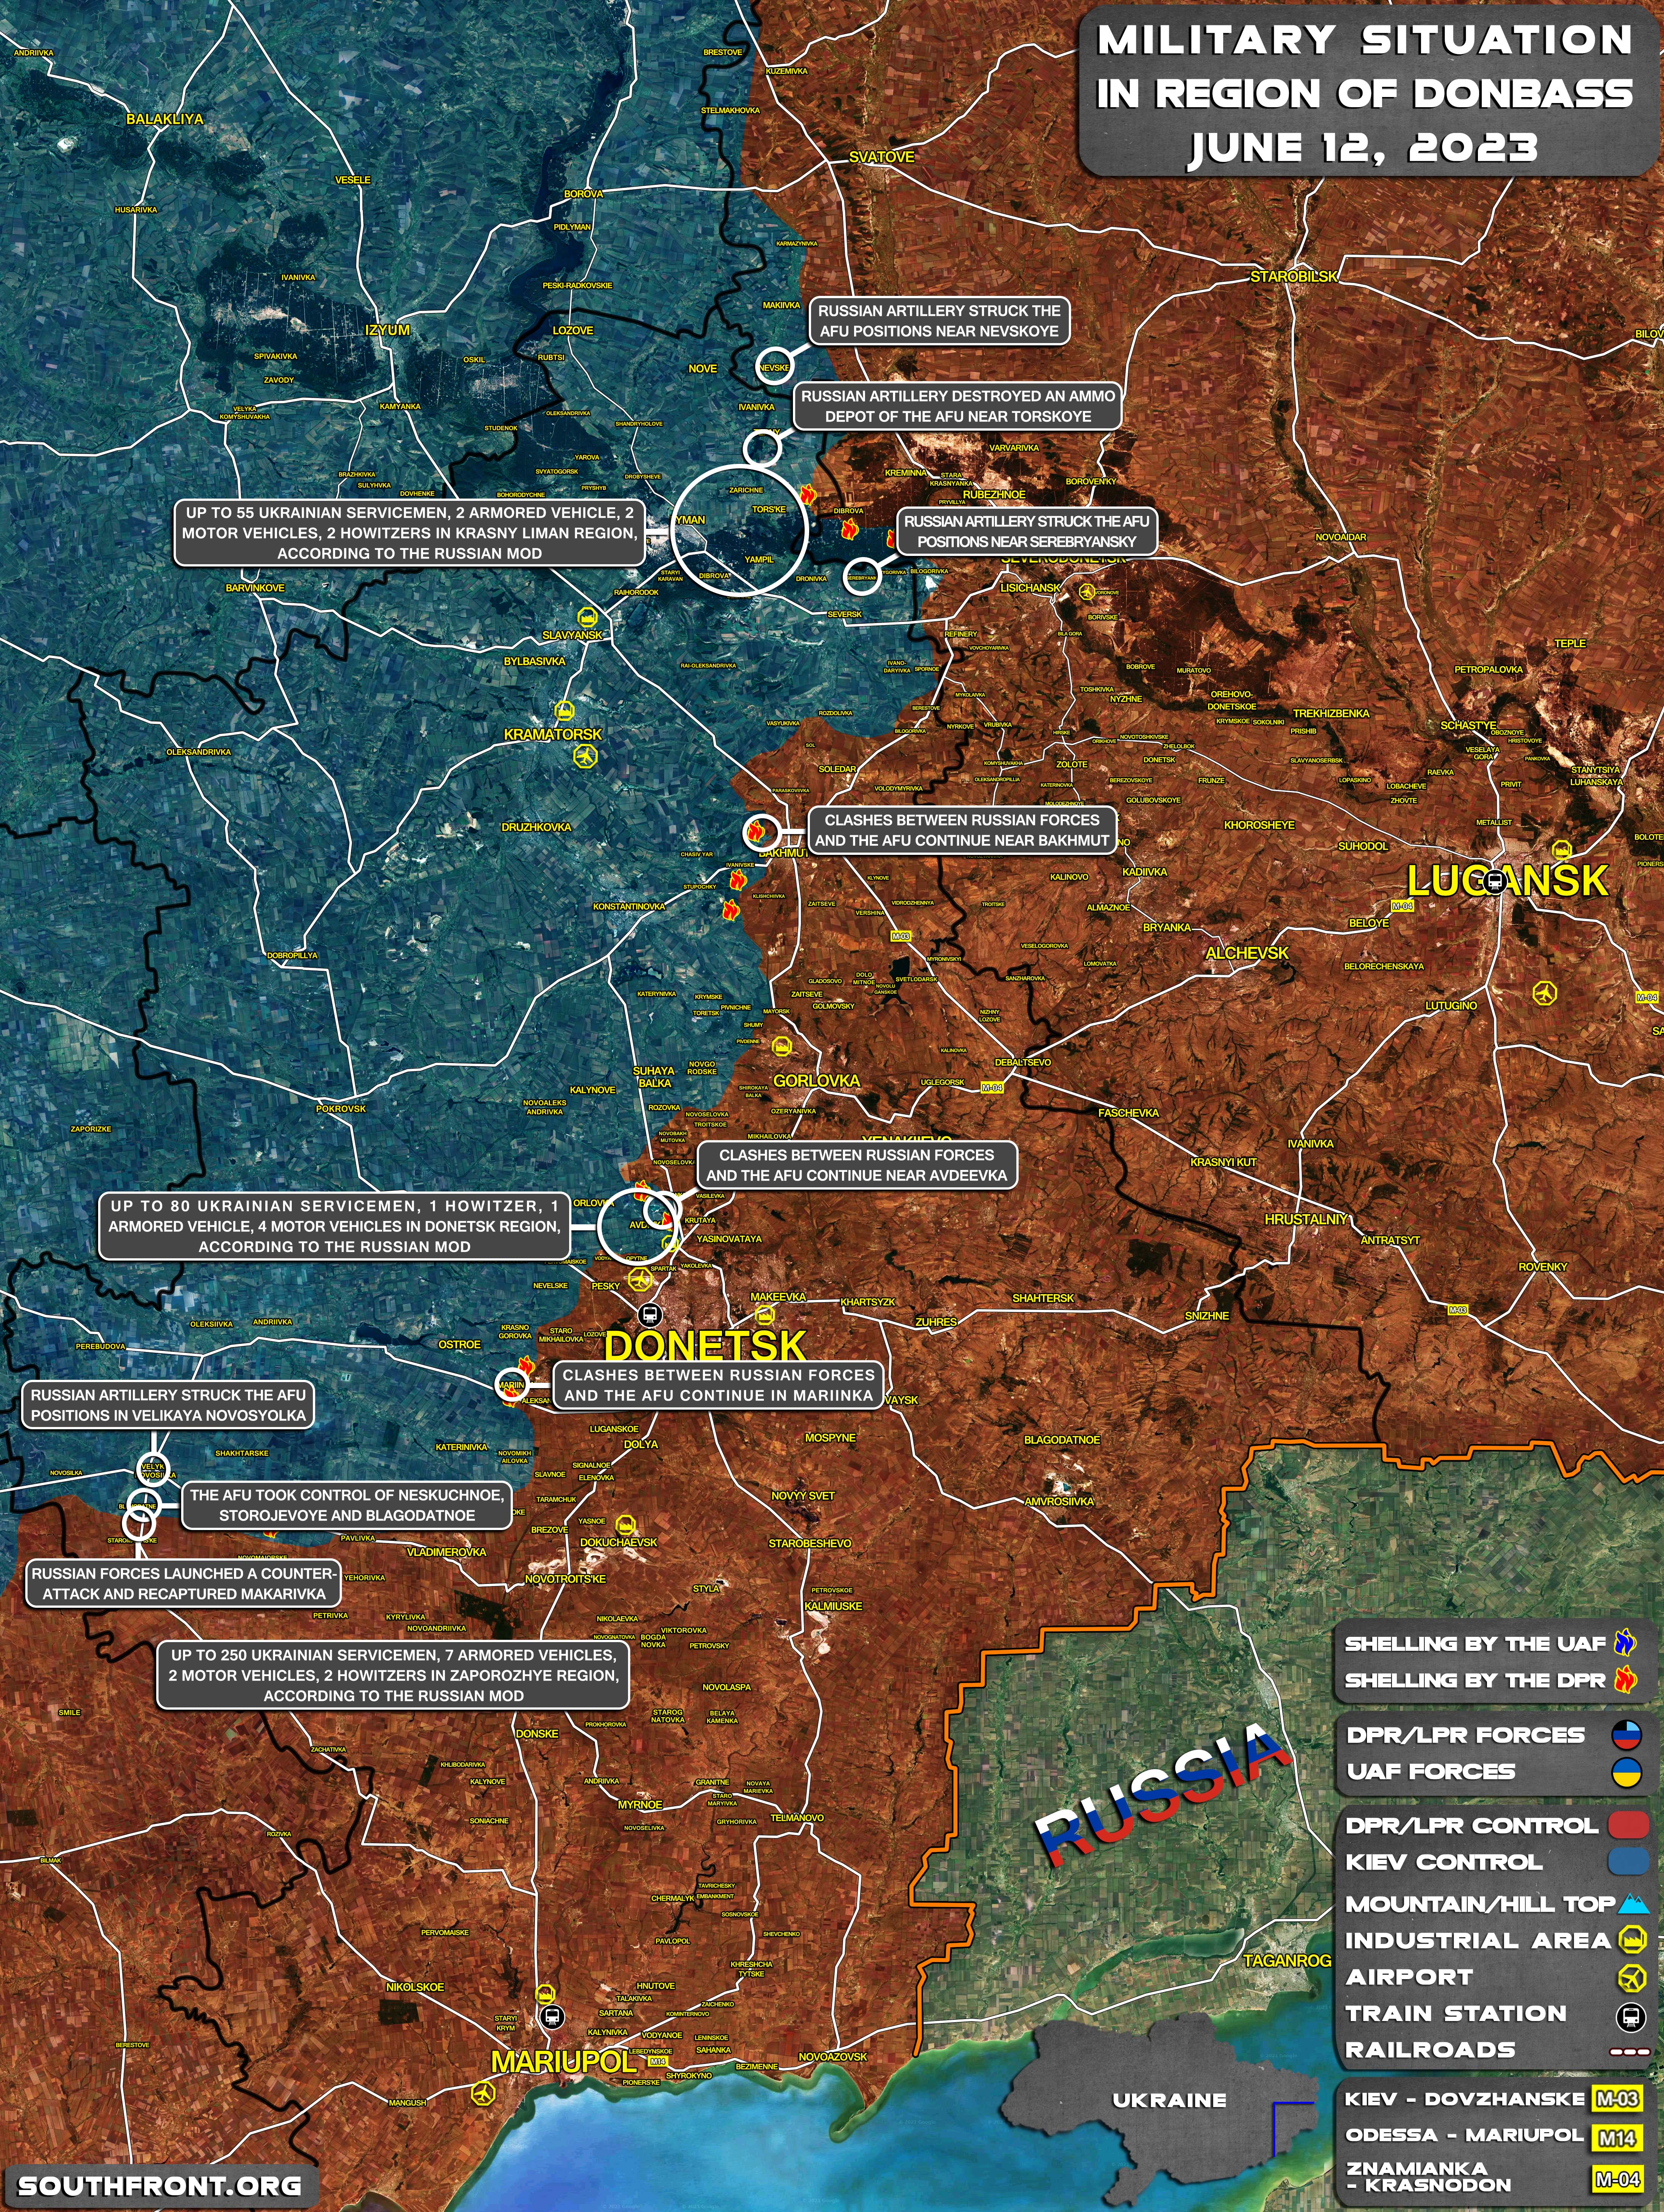 12june2023_Military_Situation_in_region_of_Donbass.jpg